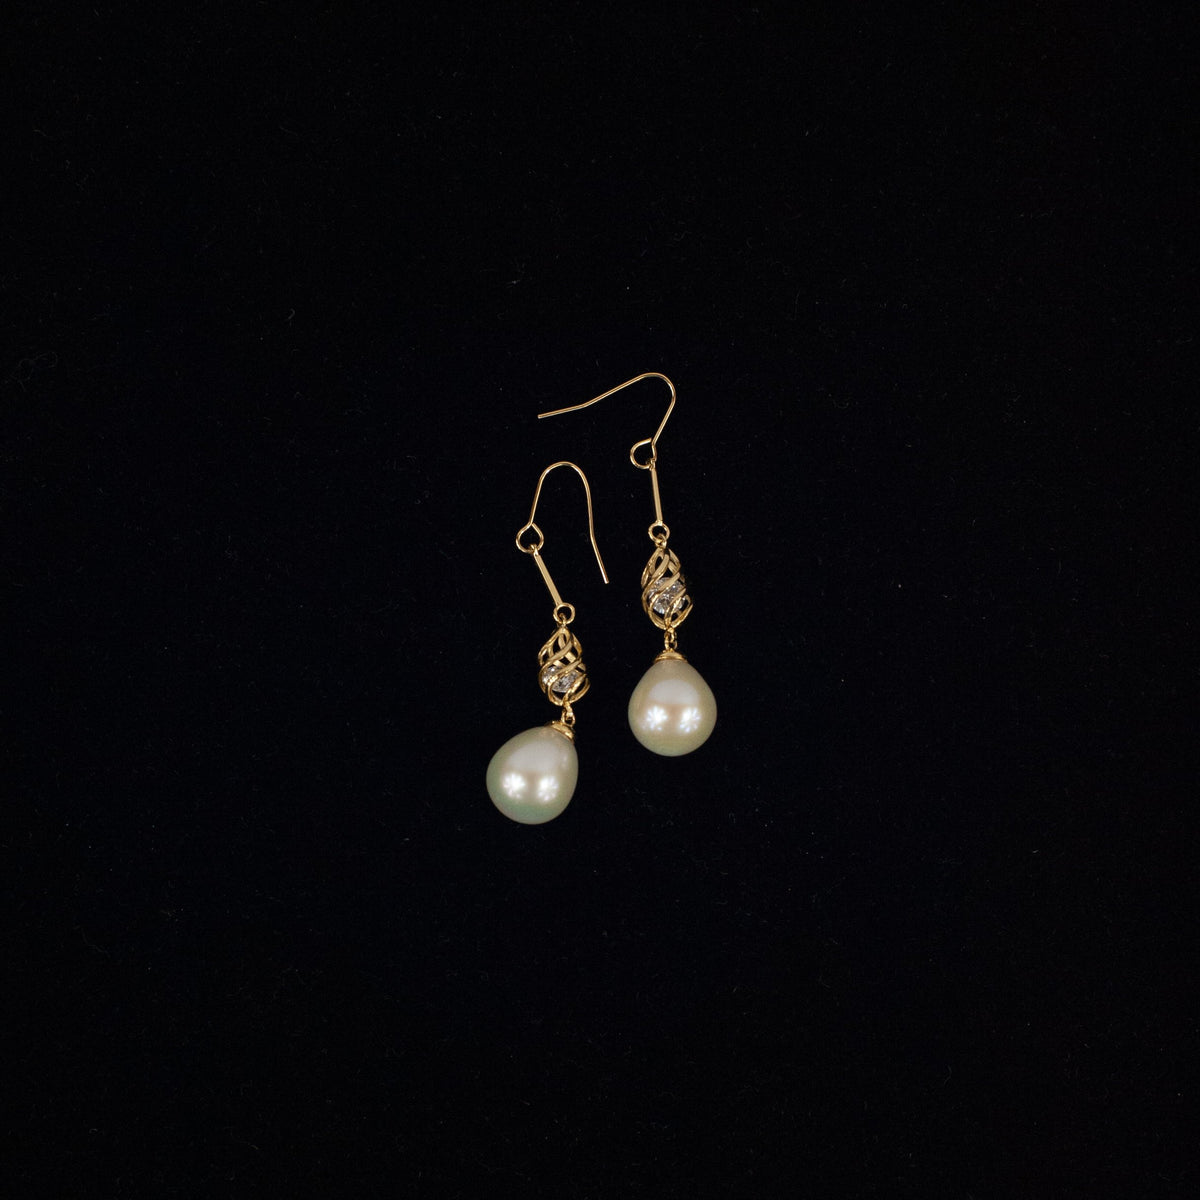 Pearl Droplet A Earrings - Blue Sky Clothing Co